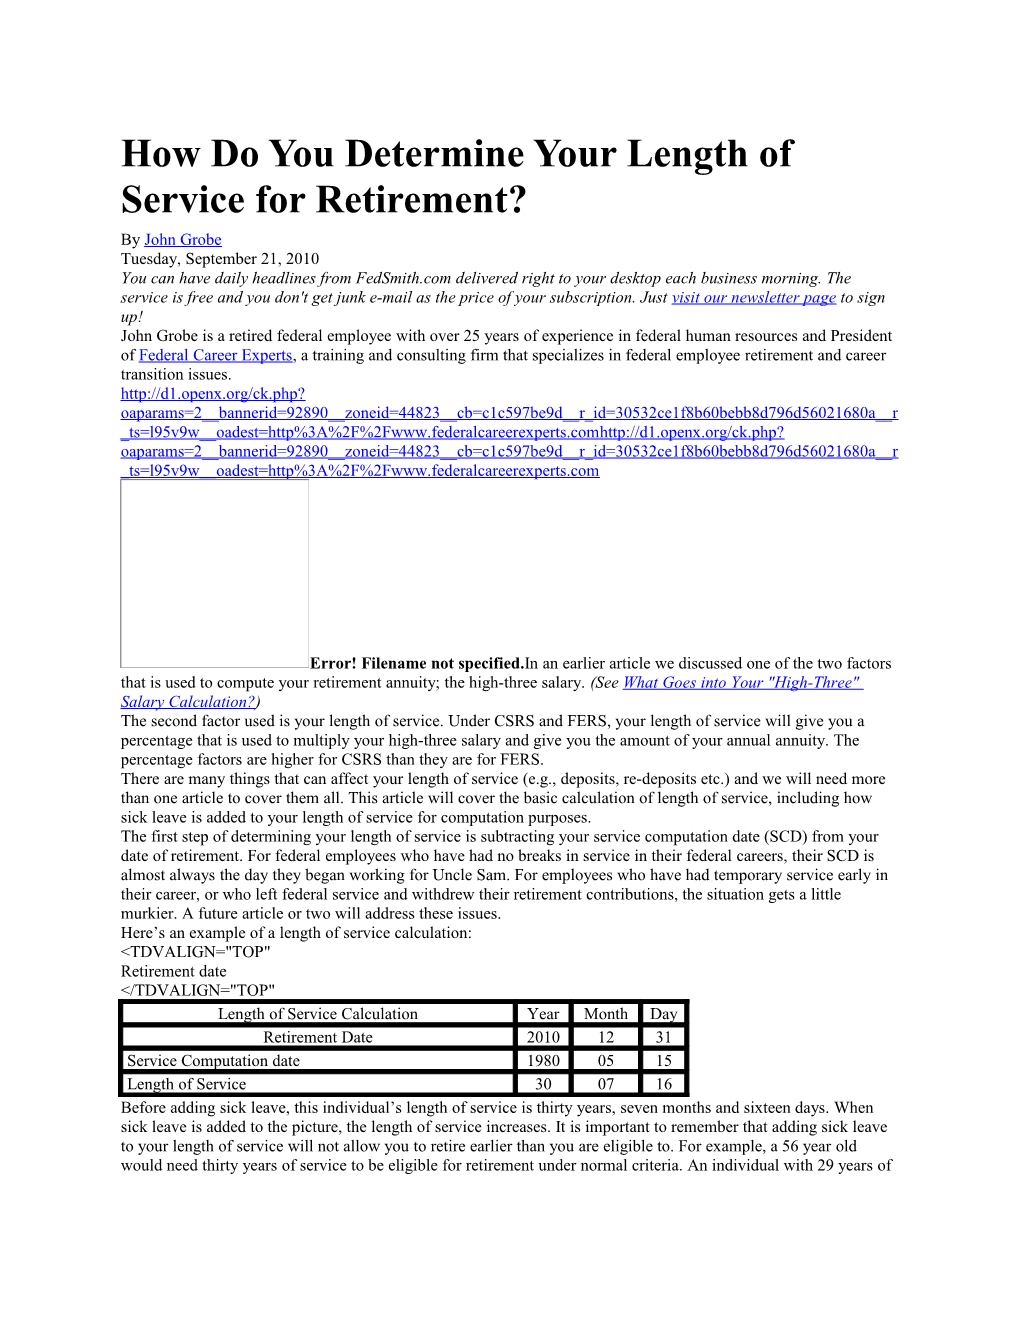 How Do You Determine Your Length of Service for Retirement